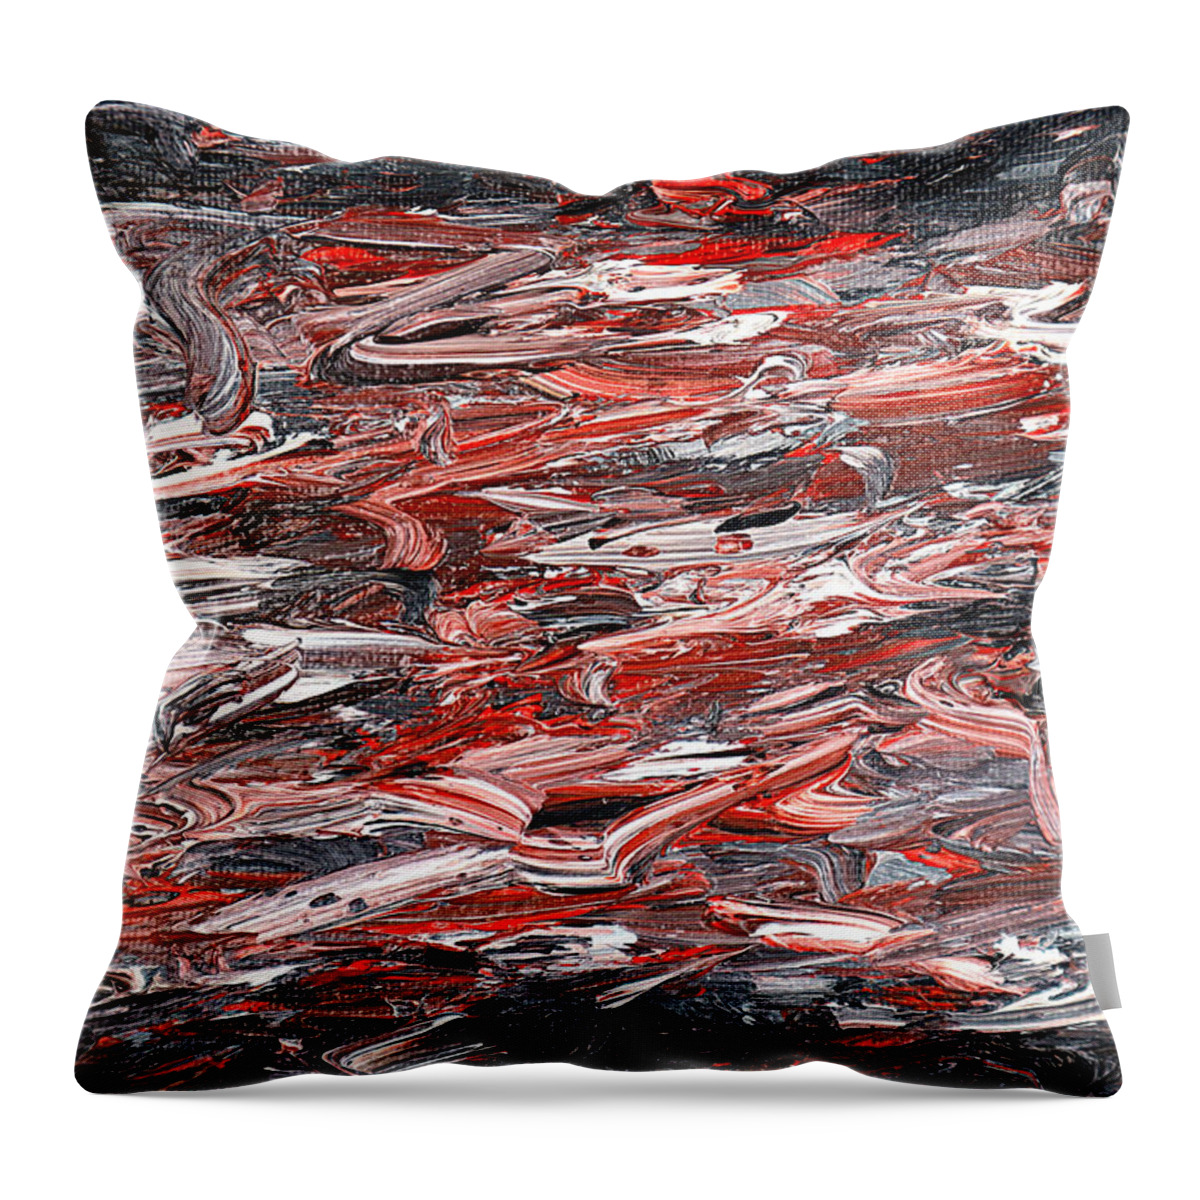 Oil Throw Pillow featuring the painting Abstract 27 by Patrick J Murphy